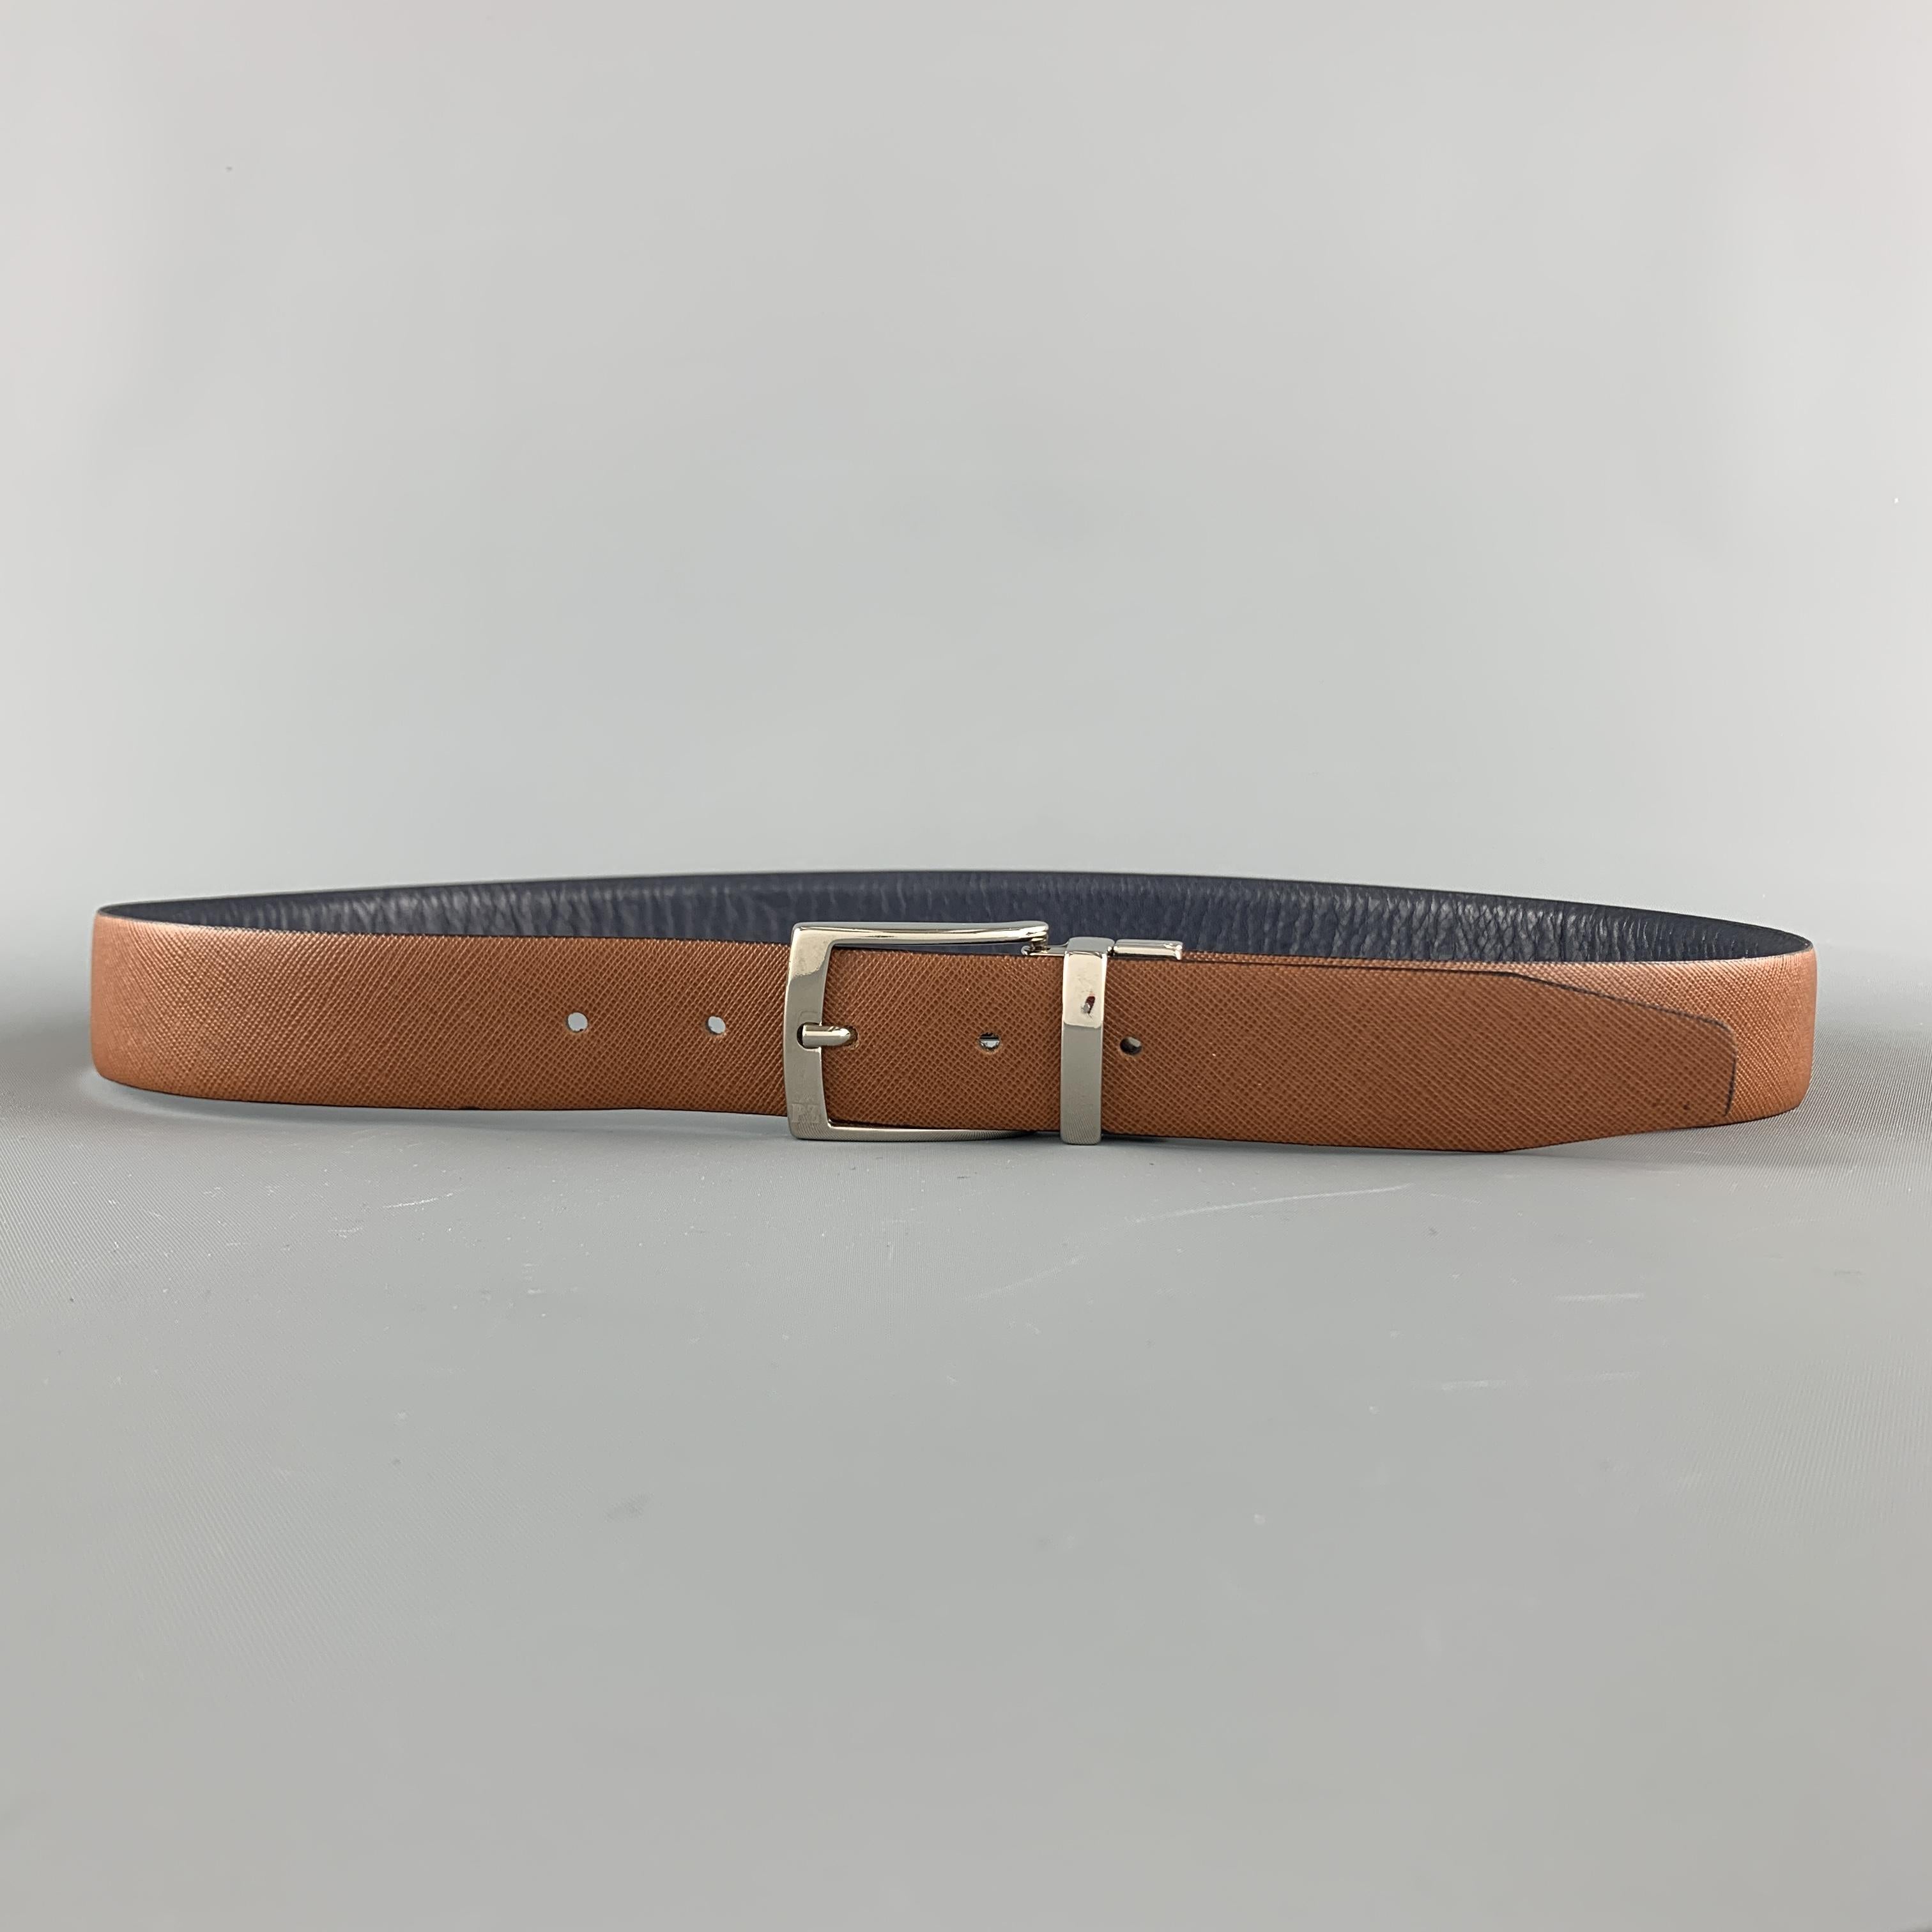 Reversible PAL ZILERI dress belt features a smooth navy blue and tan saffiano leather strap with a silver tone buckle. Made in Italy.

Excellent Pre-Owned Condition.
Marked: (no size)

Length: 43.5 in.
Width: 1.25 in.
Fits: 35-39 in.